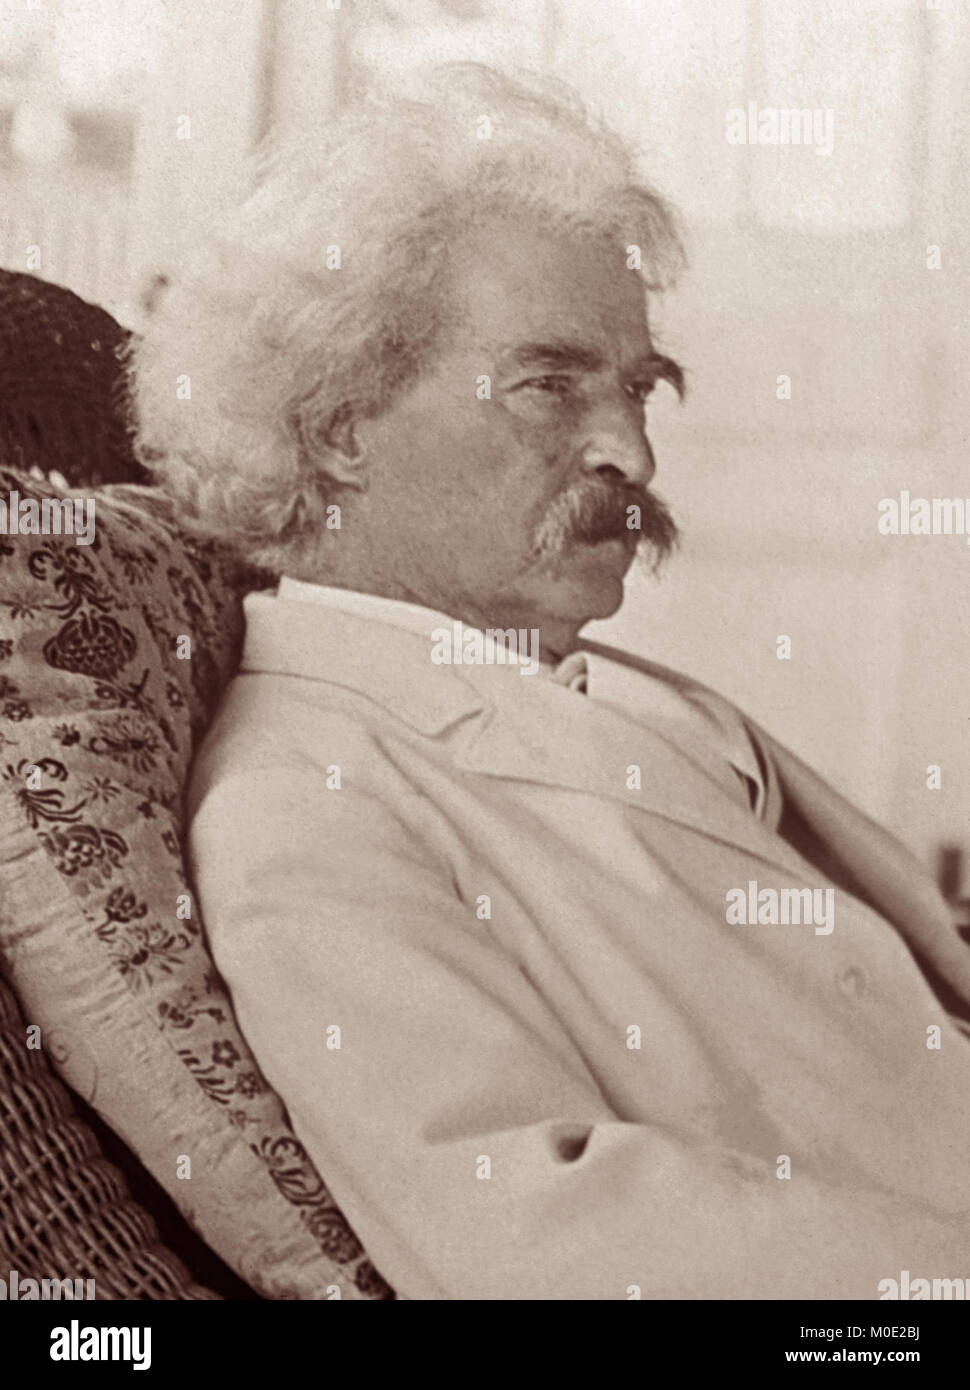 Samuel Langhorne Clemens (1835–1910), better known by his pen name Mark Twain, was an American writer and humorist, best known for his novels The Adventures of Tom Sawyer (1876) and its sequel, the Adventures of Huckleberry Finn (1885). Photo by George Grantham Bain, 1910. Stock Photo